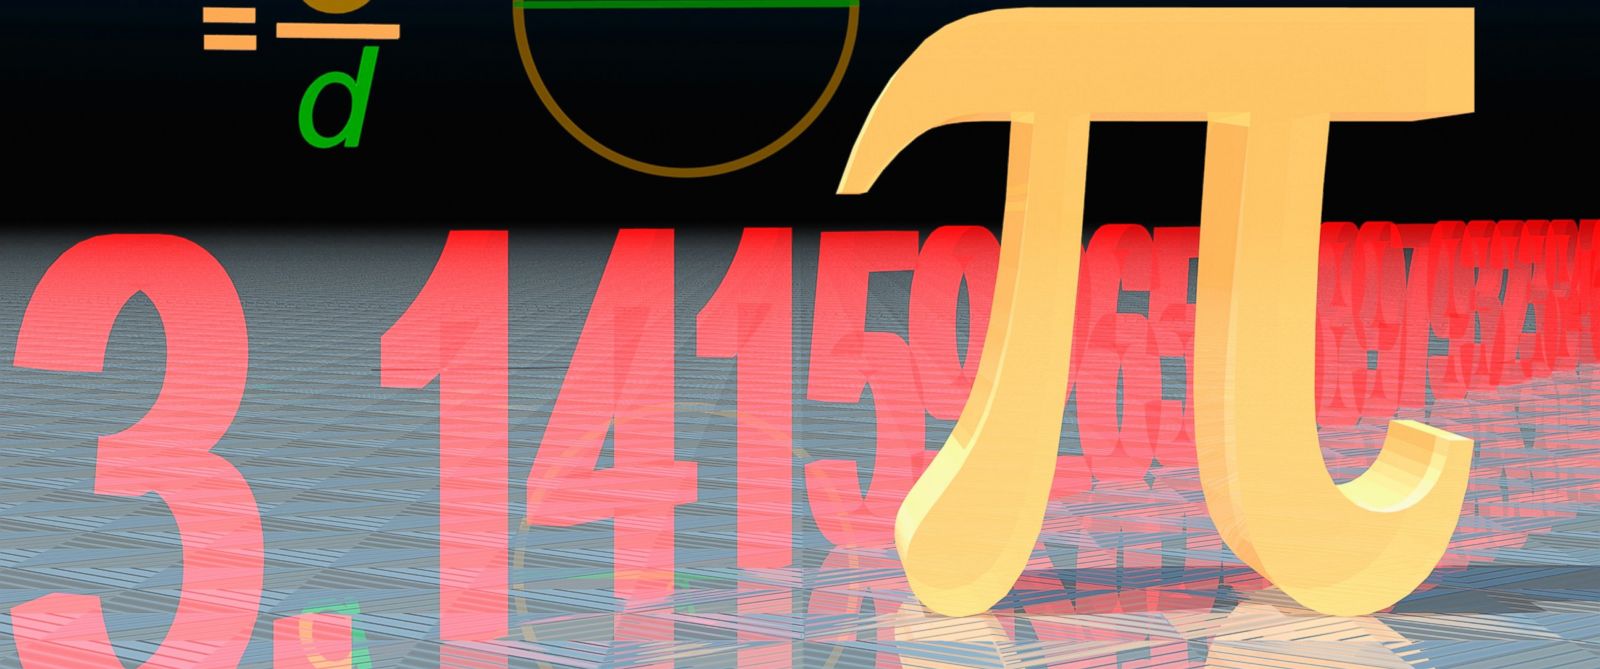 Why ‘Pi Day’ 2016 Is Extra Special